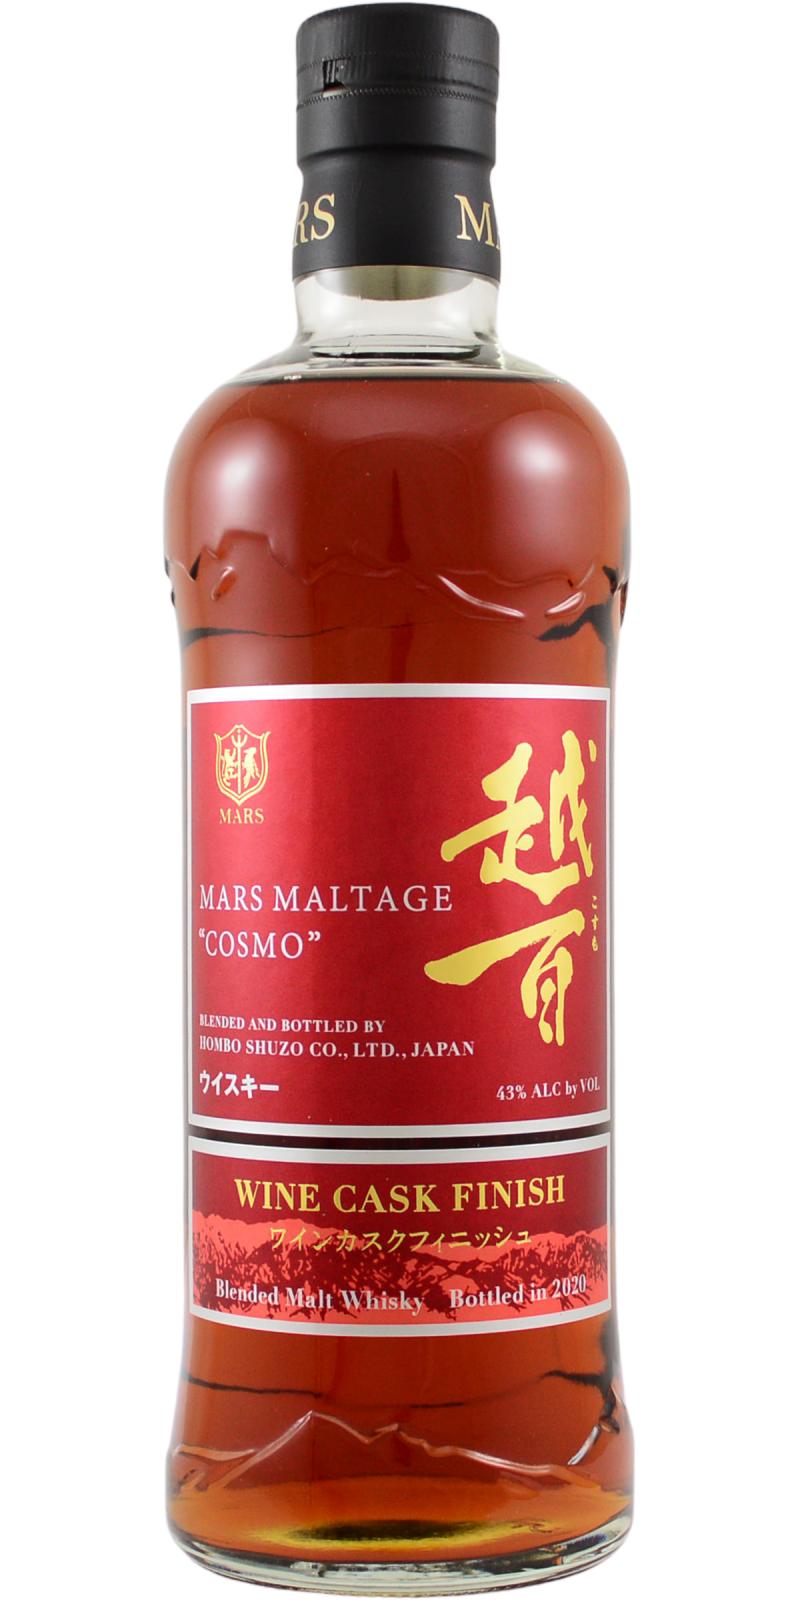 Mars Maltage Cosmo - Ratings and reviews - Whiskybase